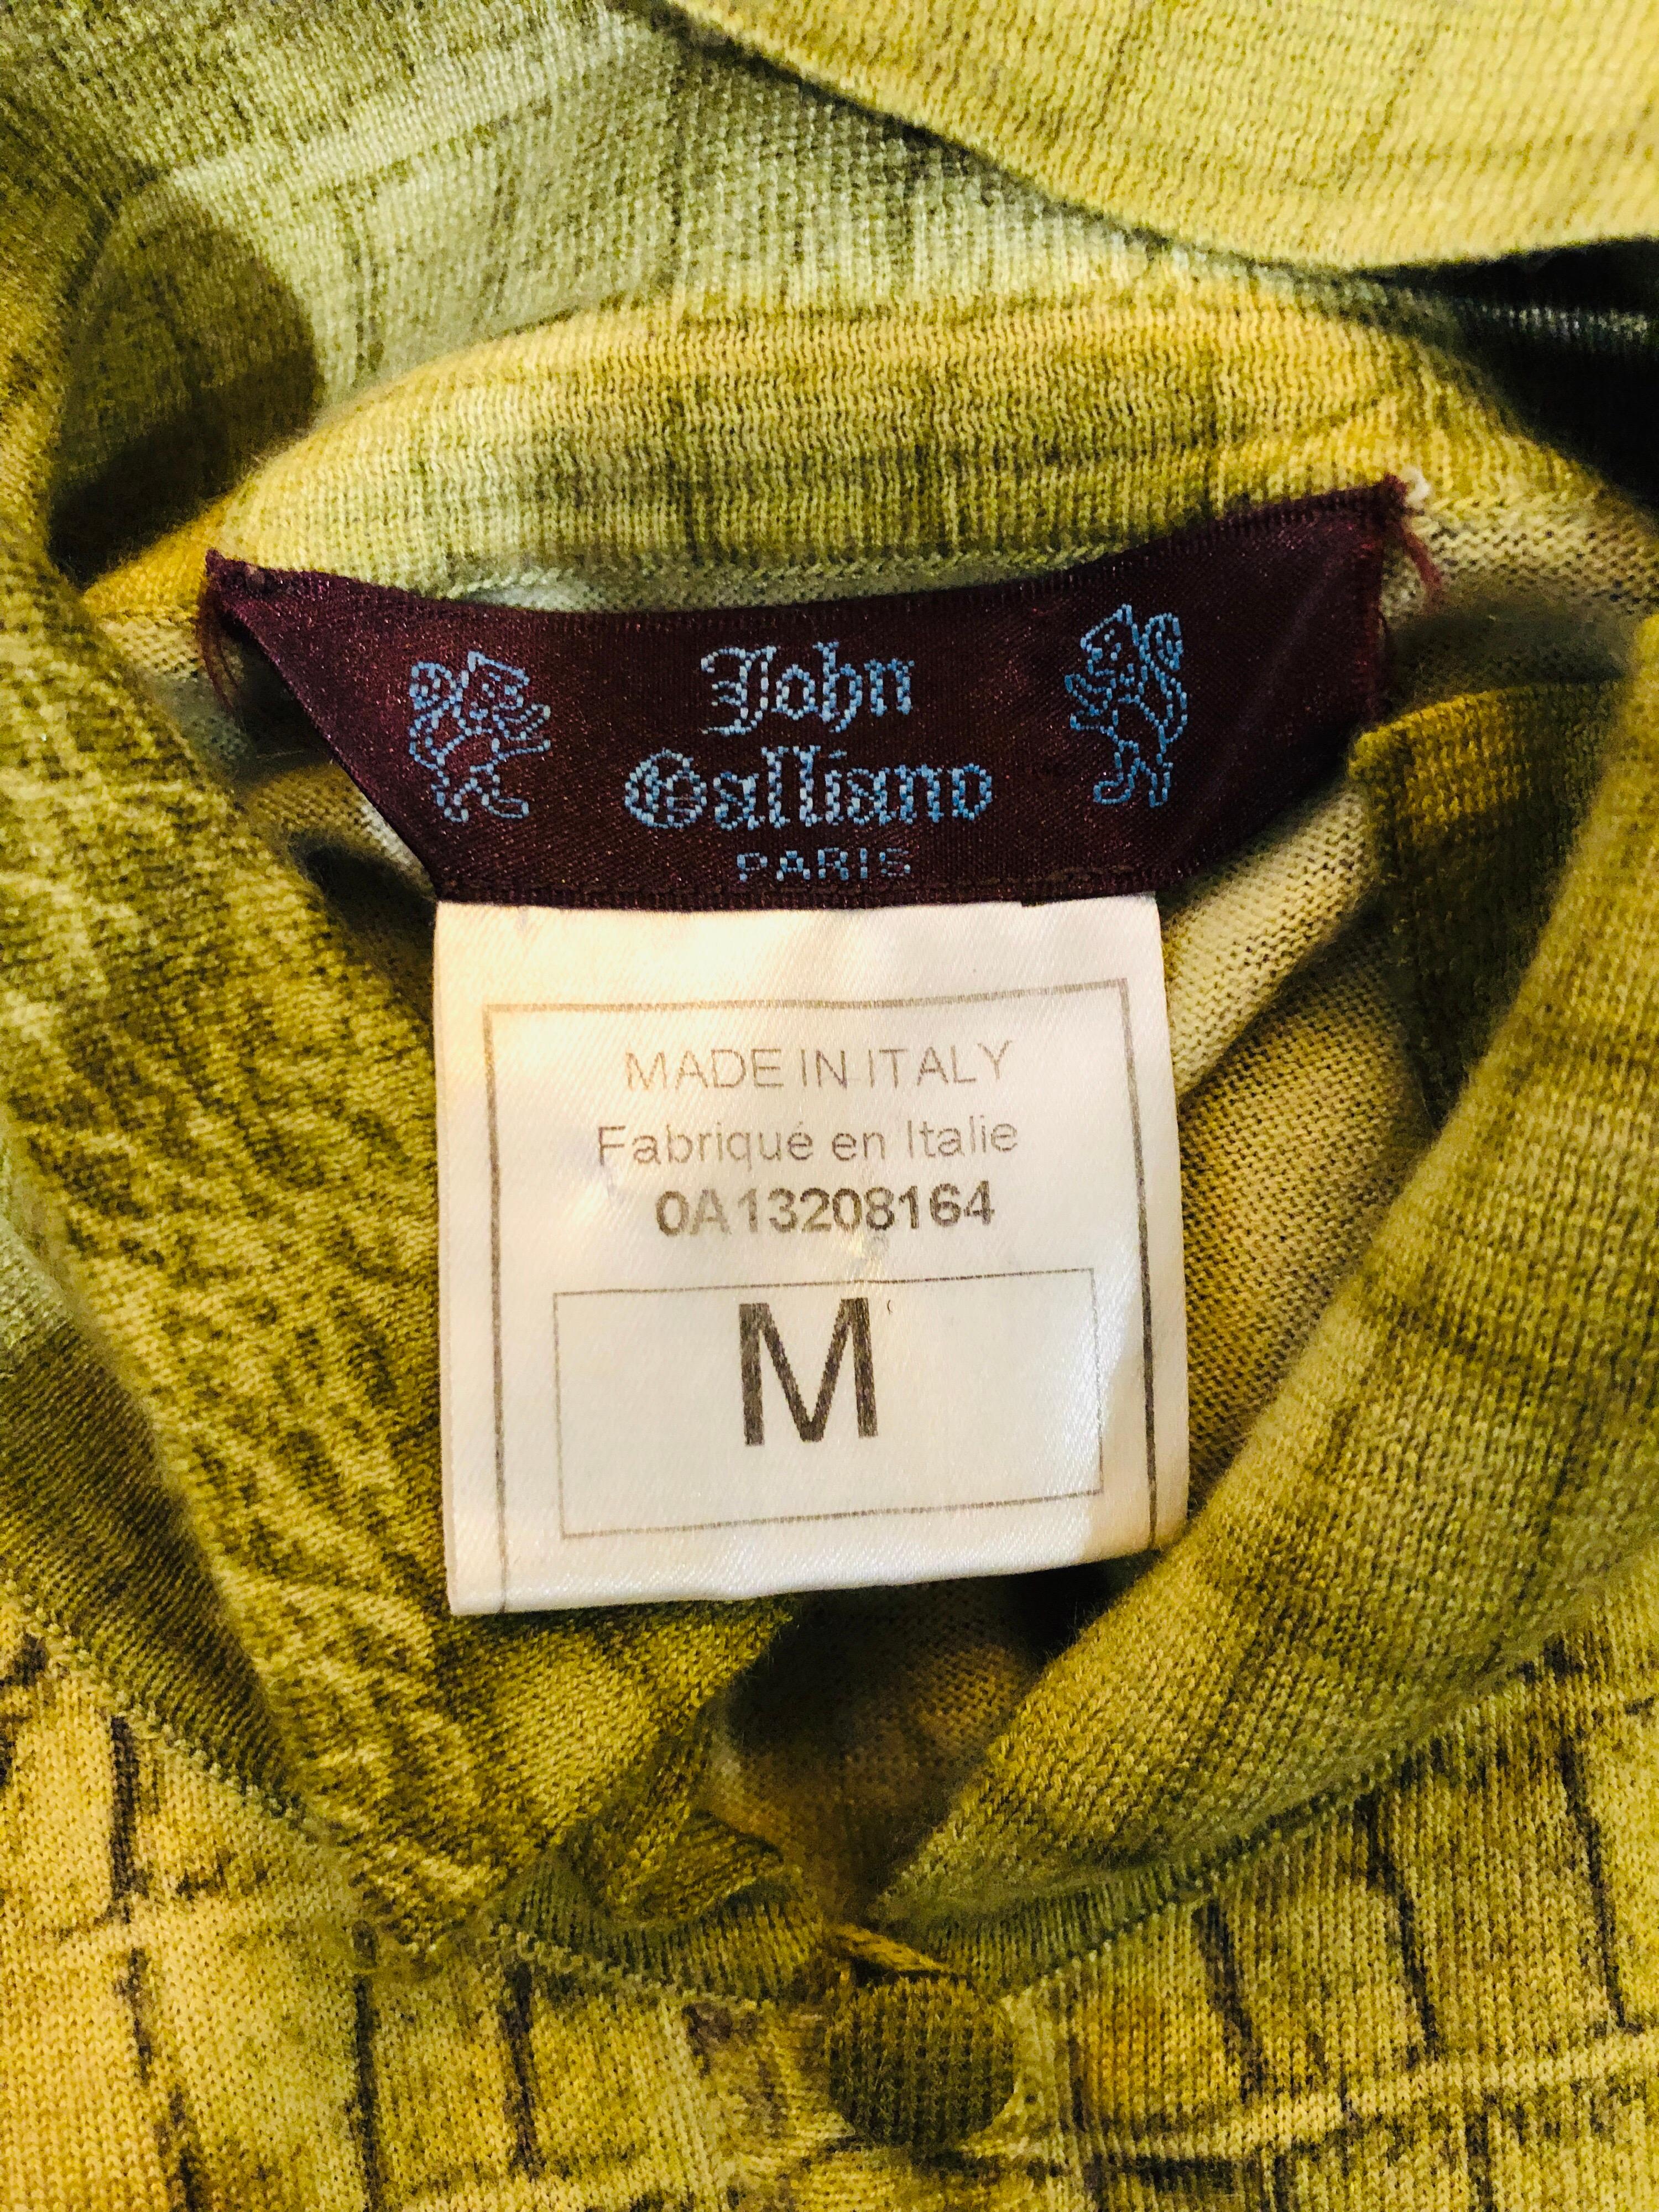 Beautiful vintage ( late 90s ) JOHN GALLIANO cashmere chartreuse green trompe l'oeil 1940s style alligator print sweater! Features a vibrant chartreuse color. Tailored fit, with plenty of stretch. Buttons up the center bust. Can easily be dressed up